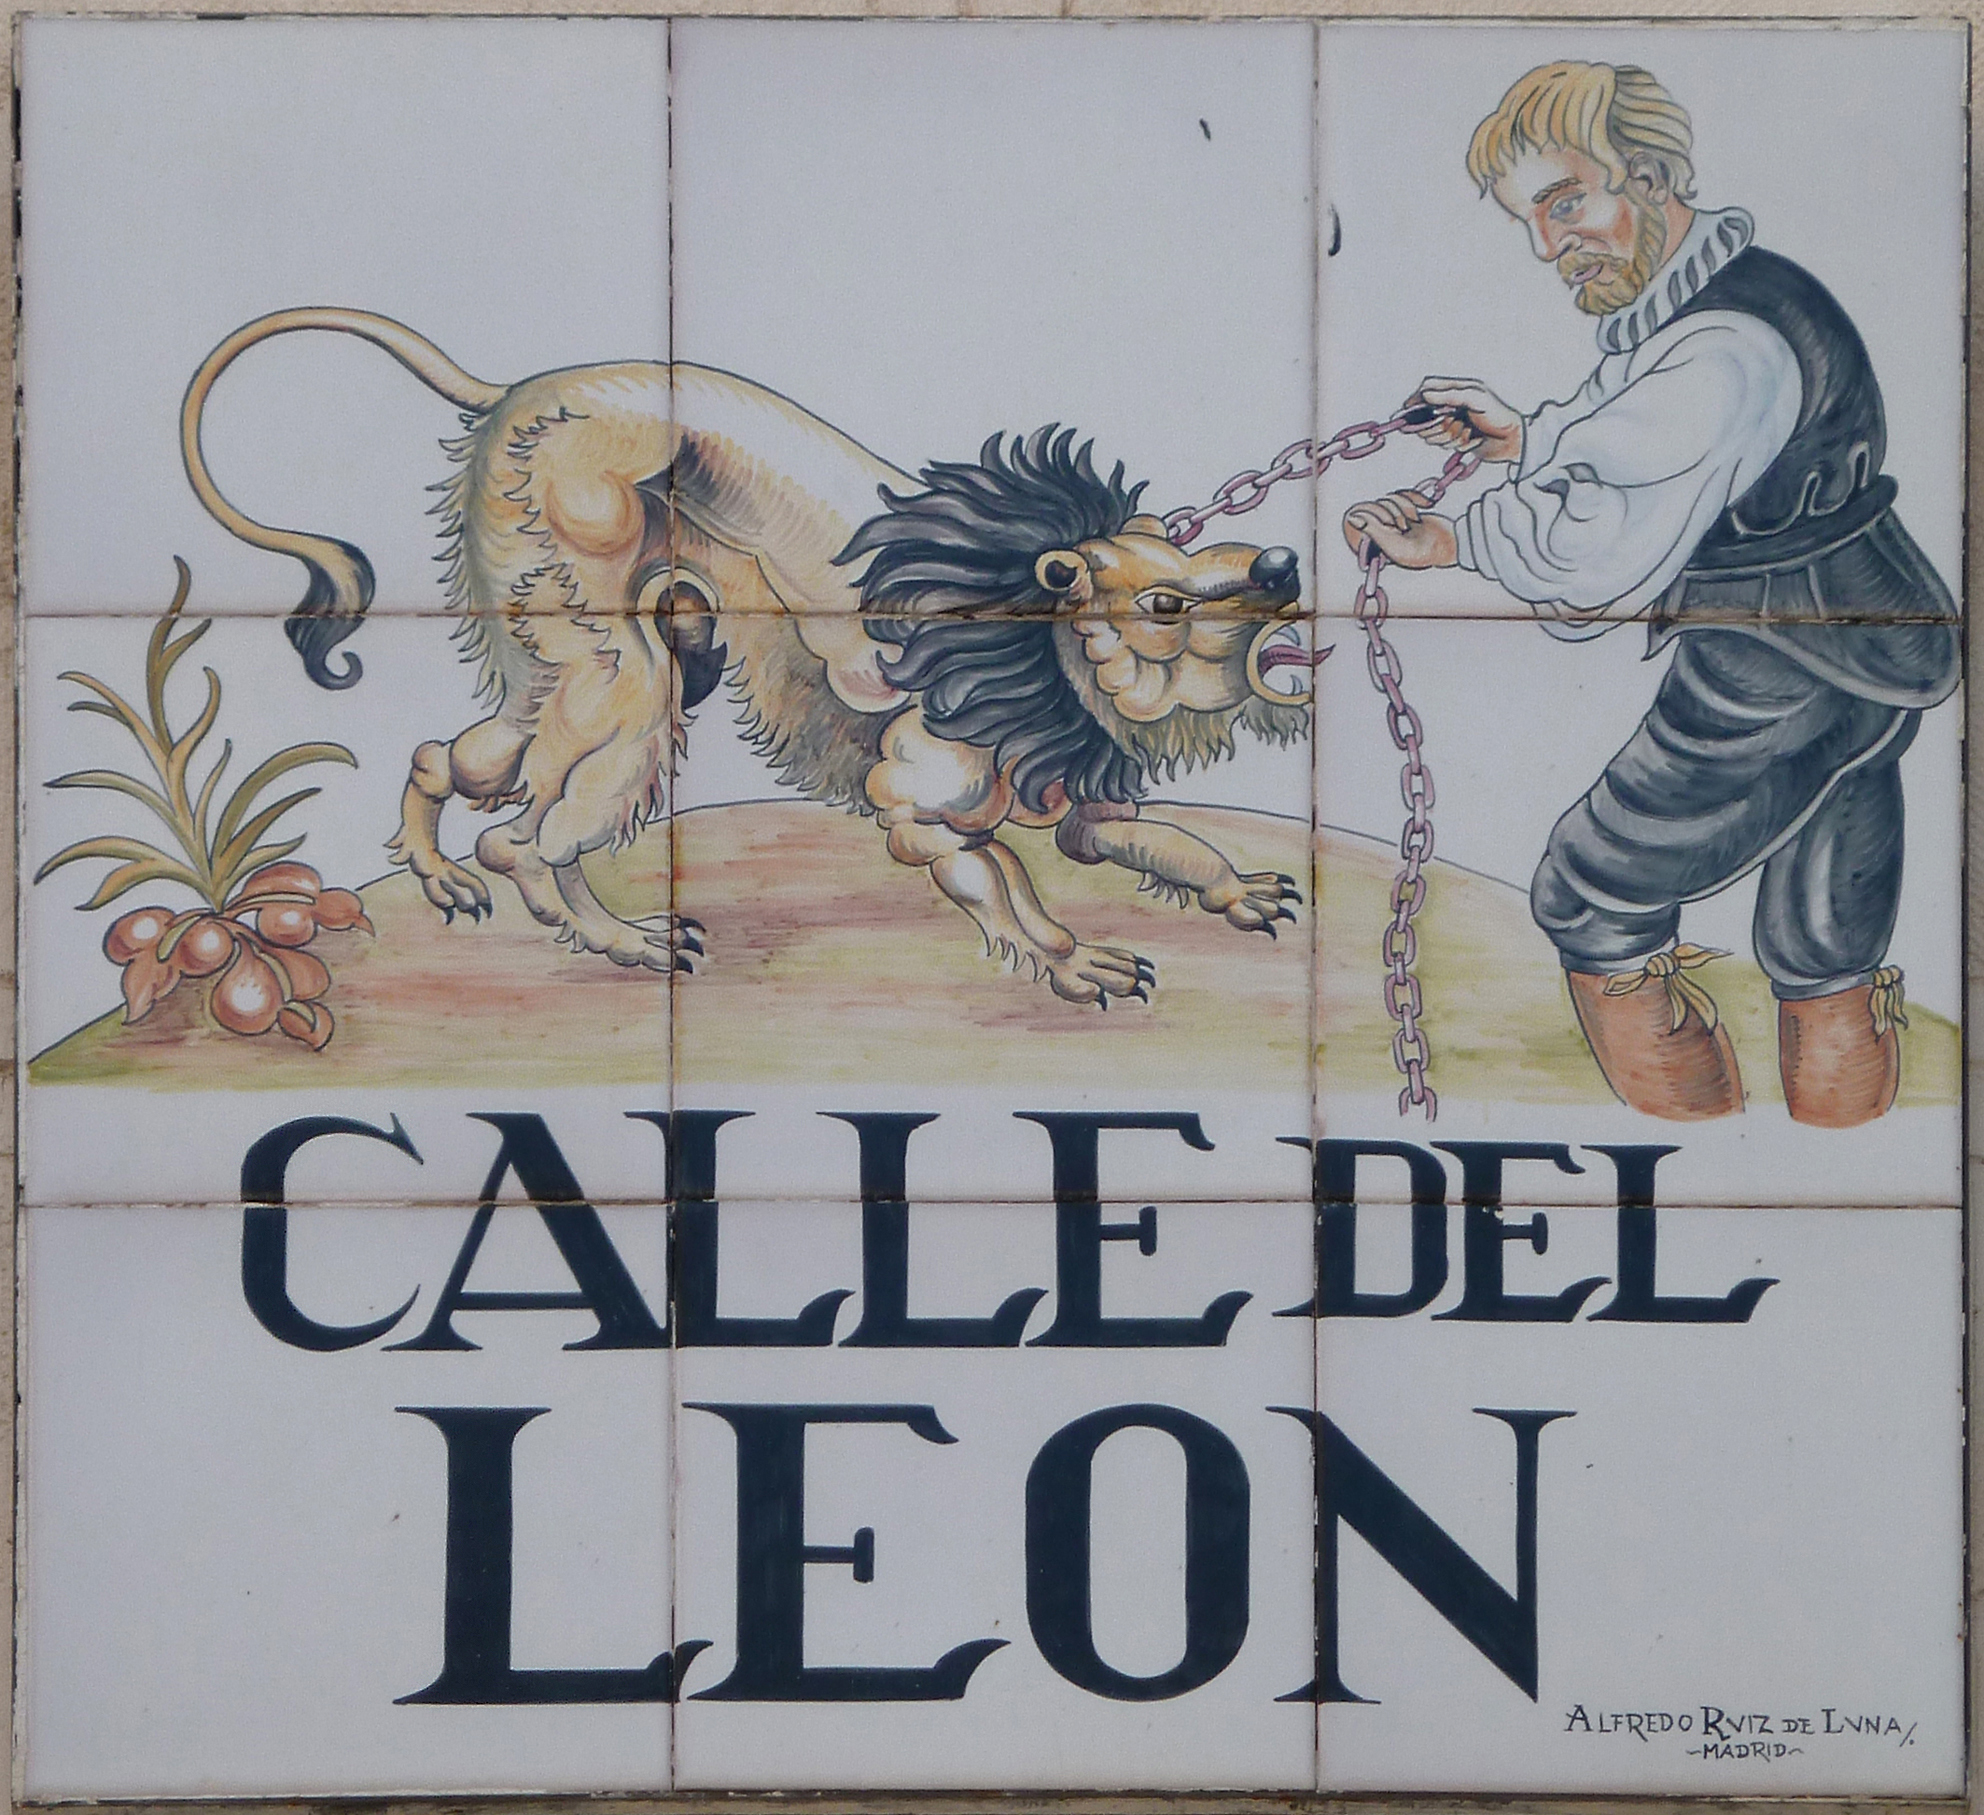 Sign of Calle del Leon (literally 'Lion Street') in Centro district in Madrid (Spain).